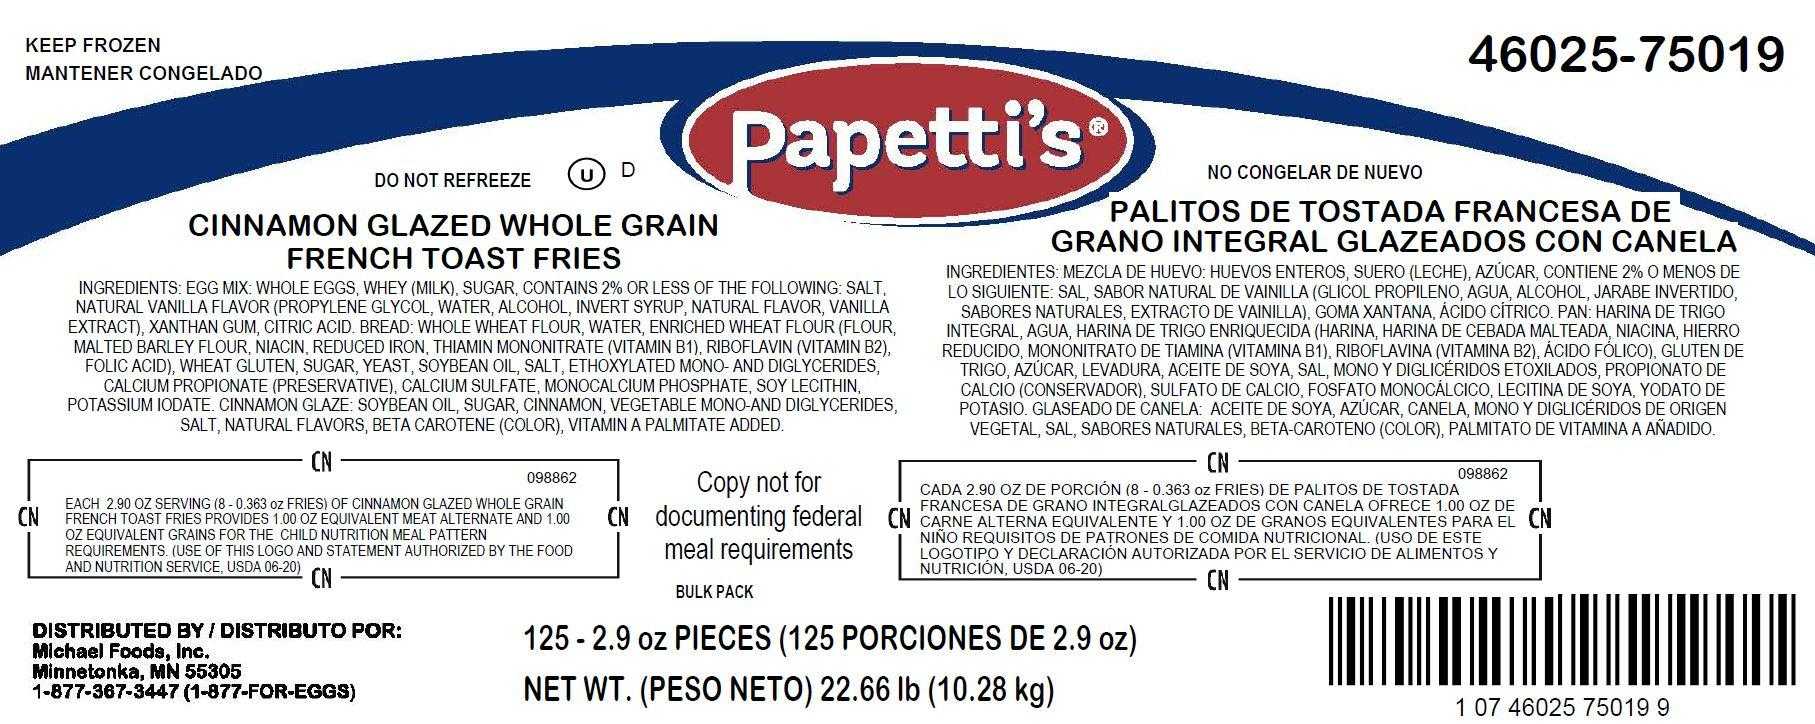 Papetti’s® Fully Cooked Whole Grain Cinnamon Glazed French Toast Fries, CN, 1/22.66 lb Box CN Labeled PDF